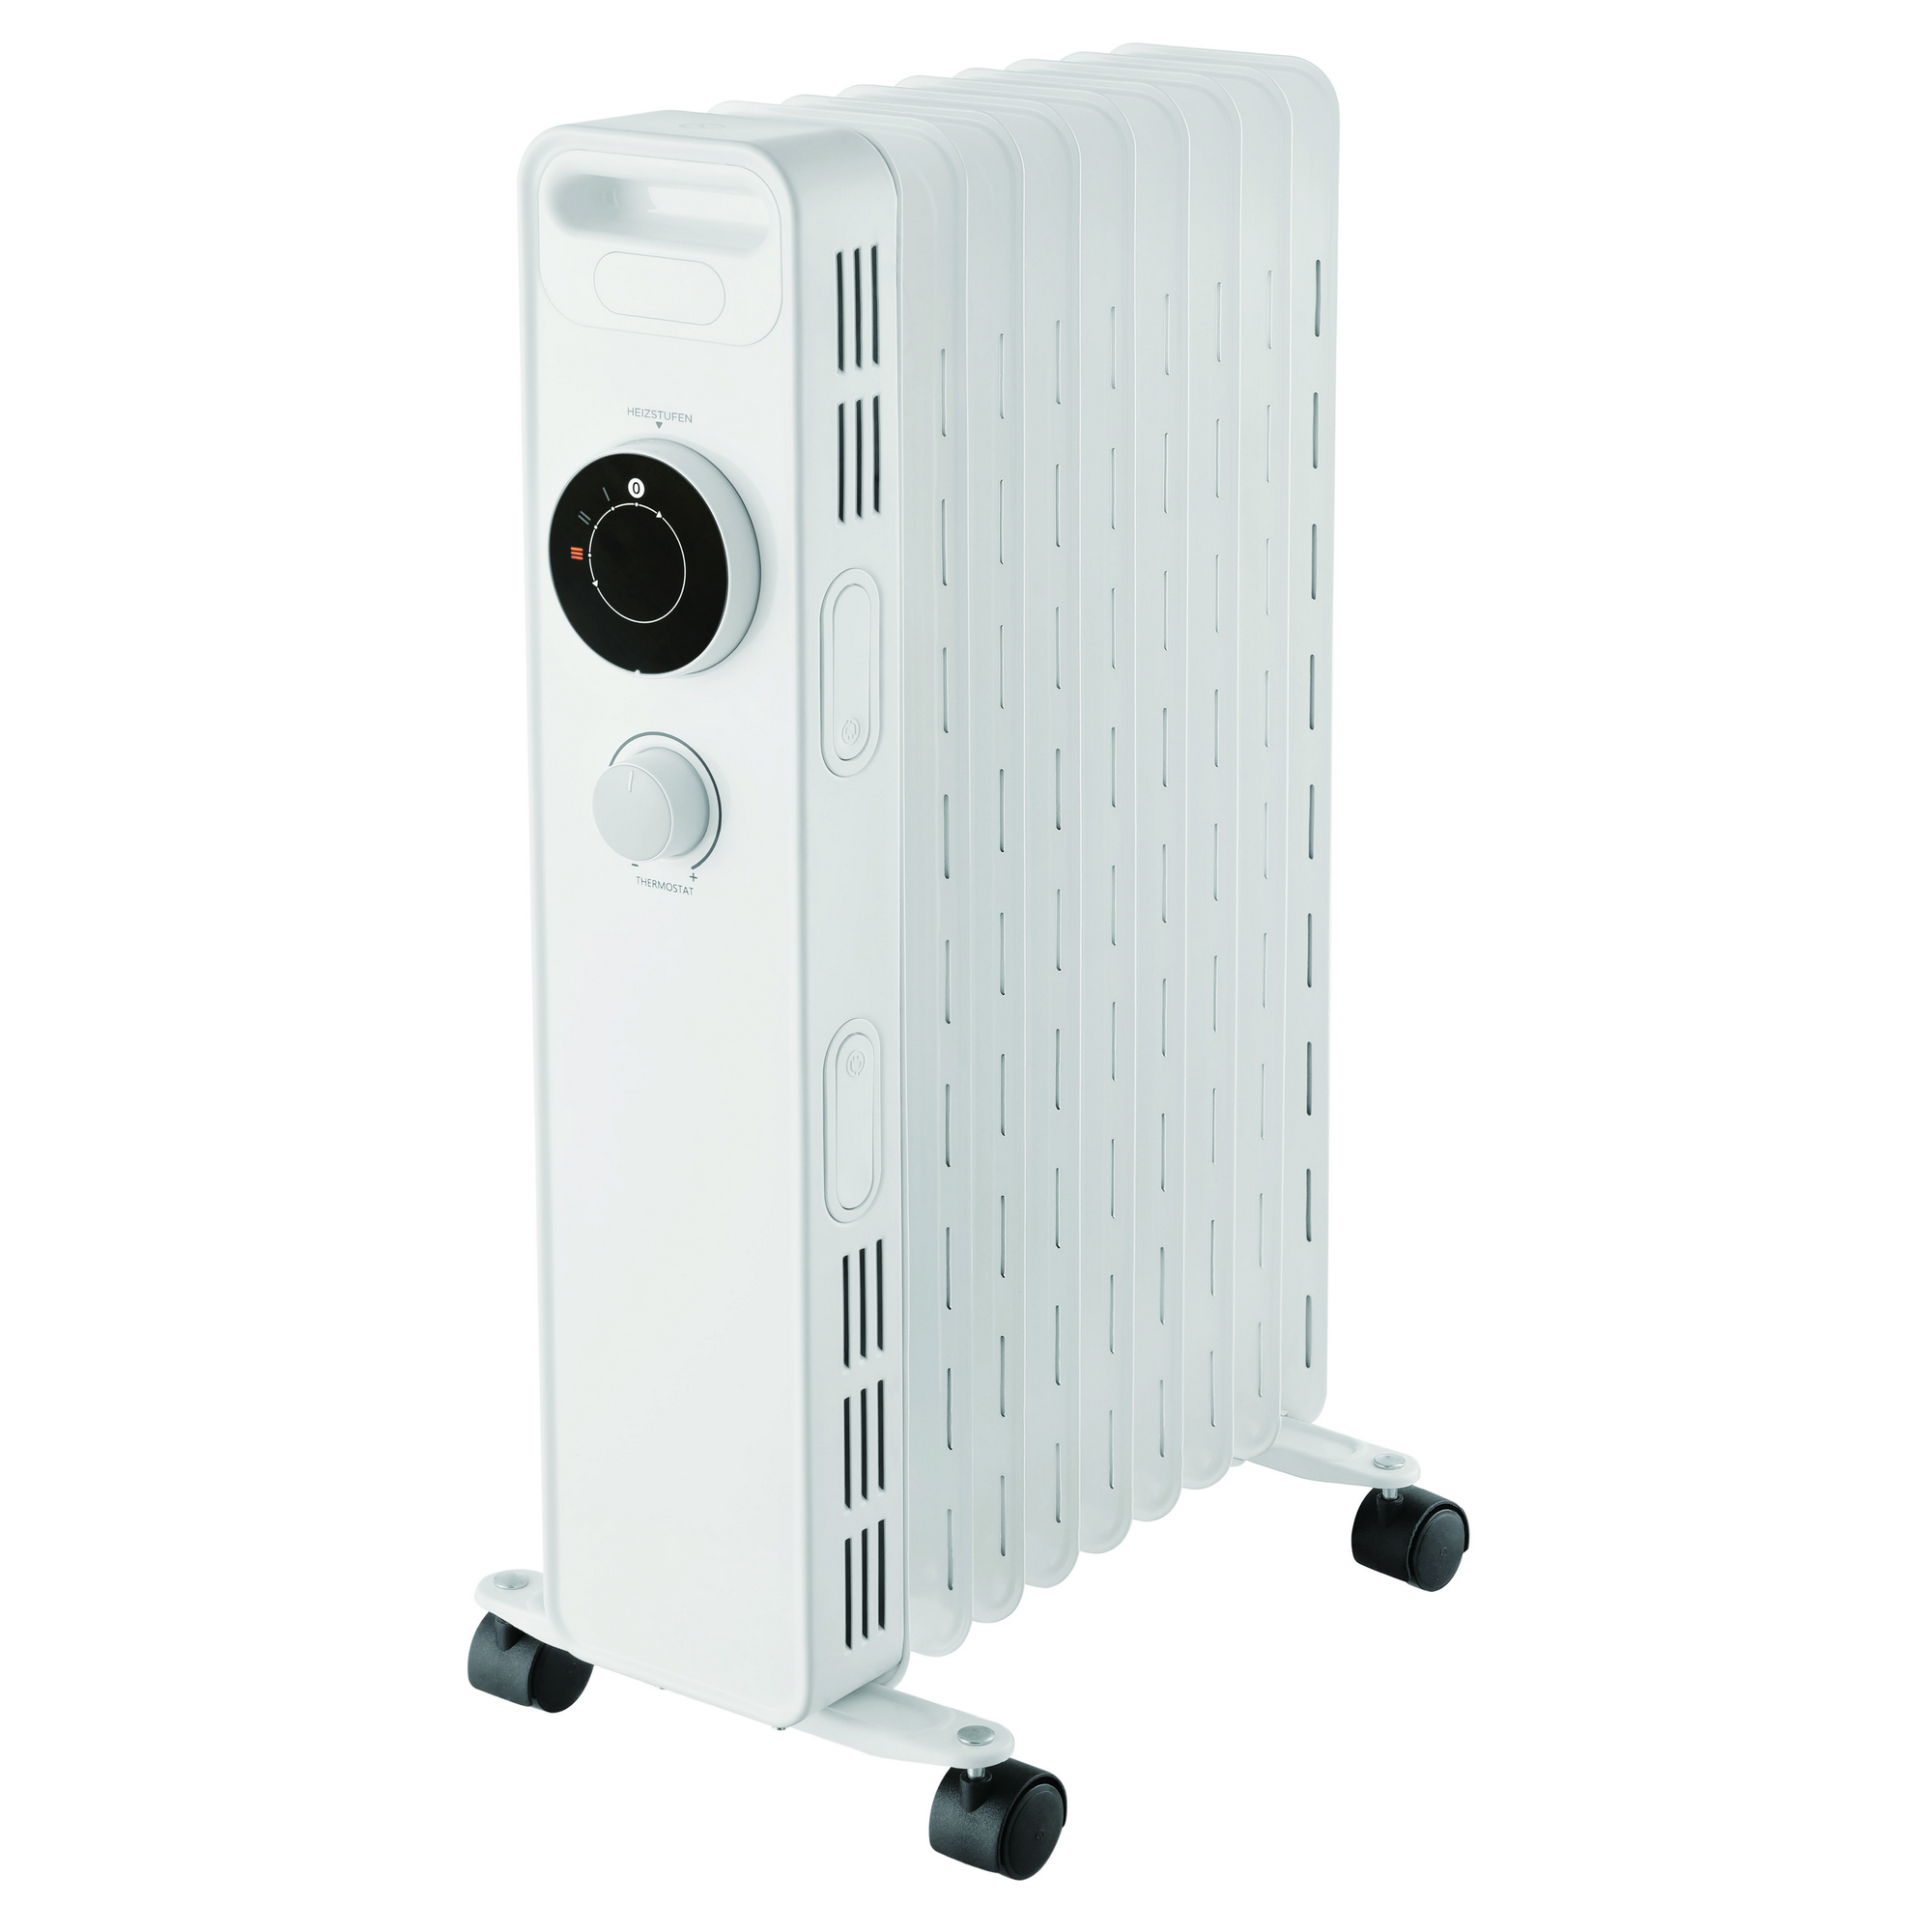 Ölradiator weiß 11 Rippen 2300 W + product picture